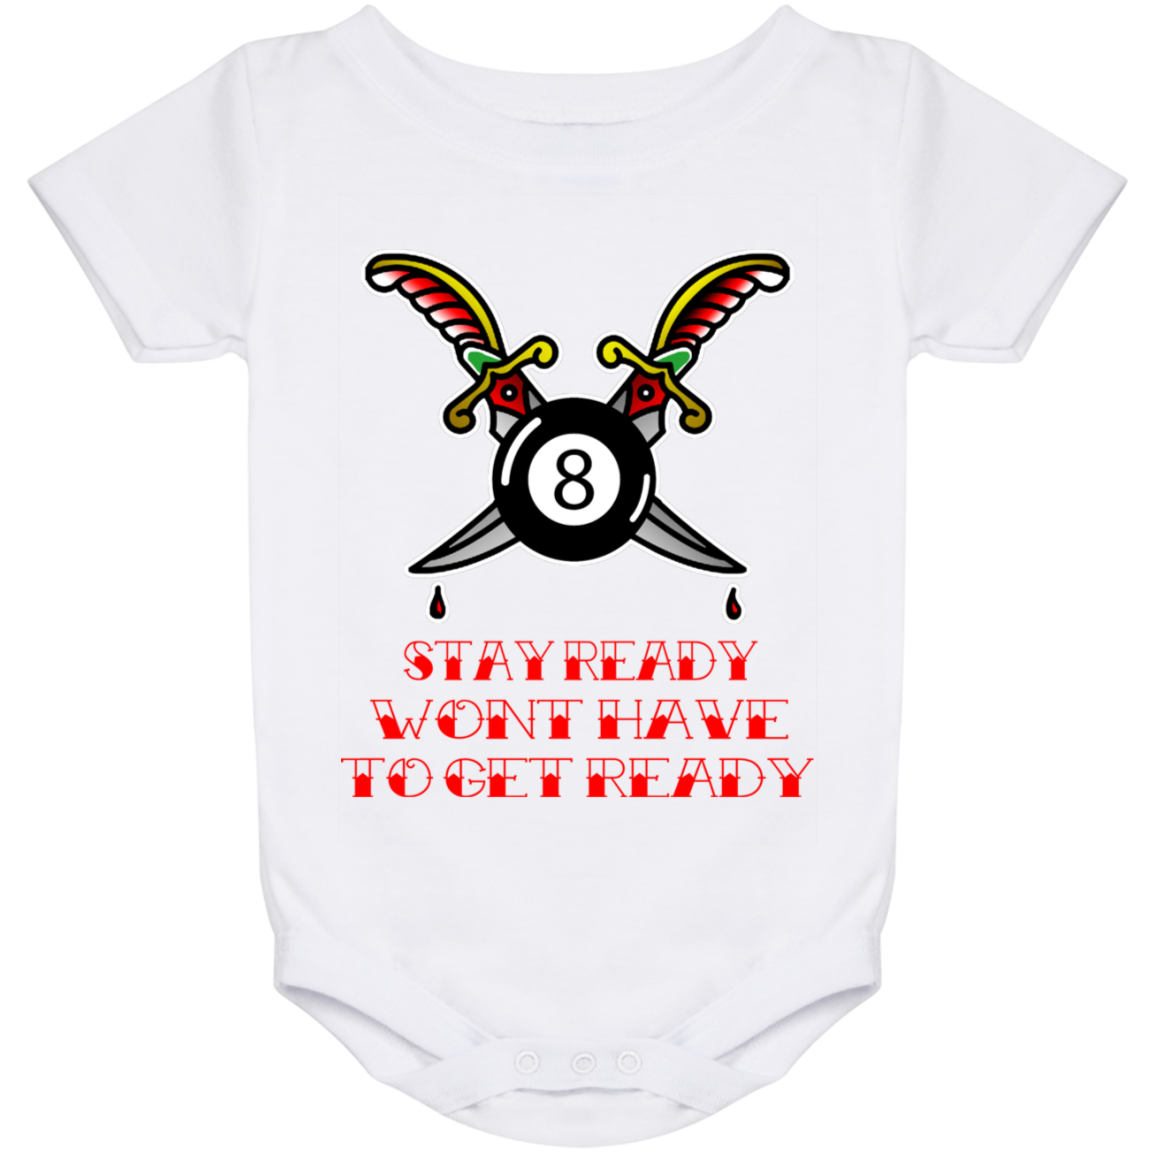 The GHOATS Custom Design #36. Stay Ready Won't Have to Get Ready. Tattoo Style. Ver. 1/2. Baby Onesie 24 Month